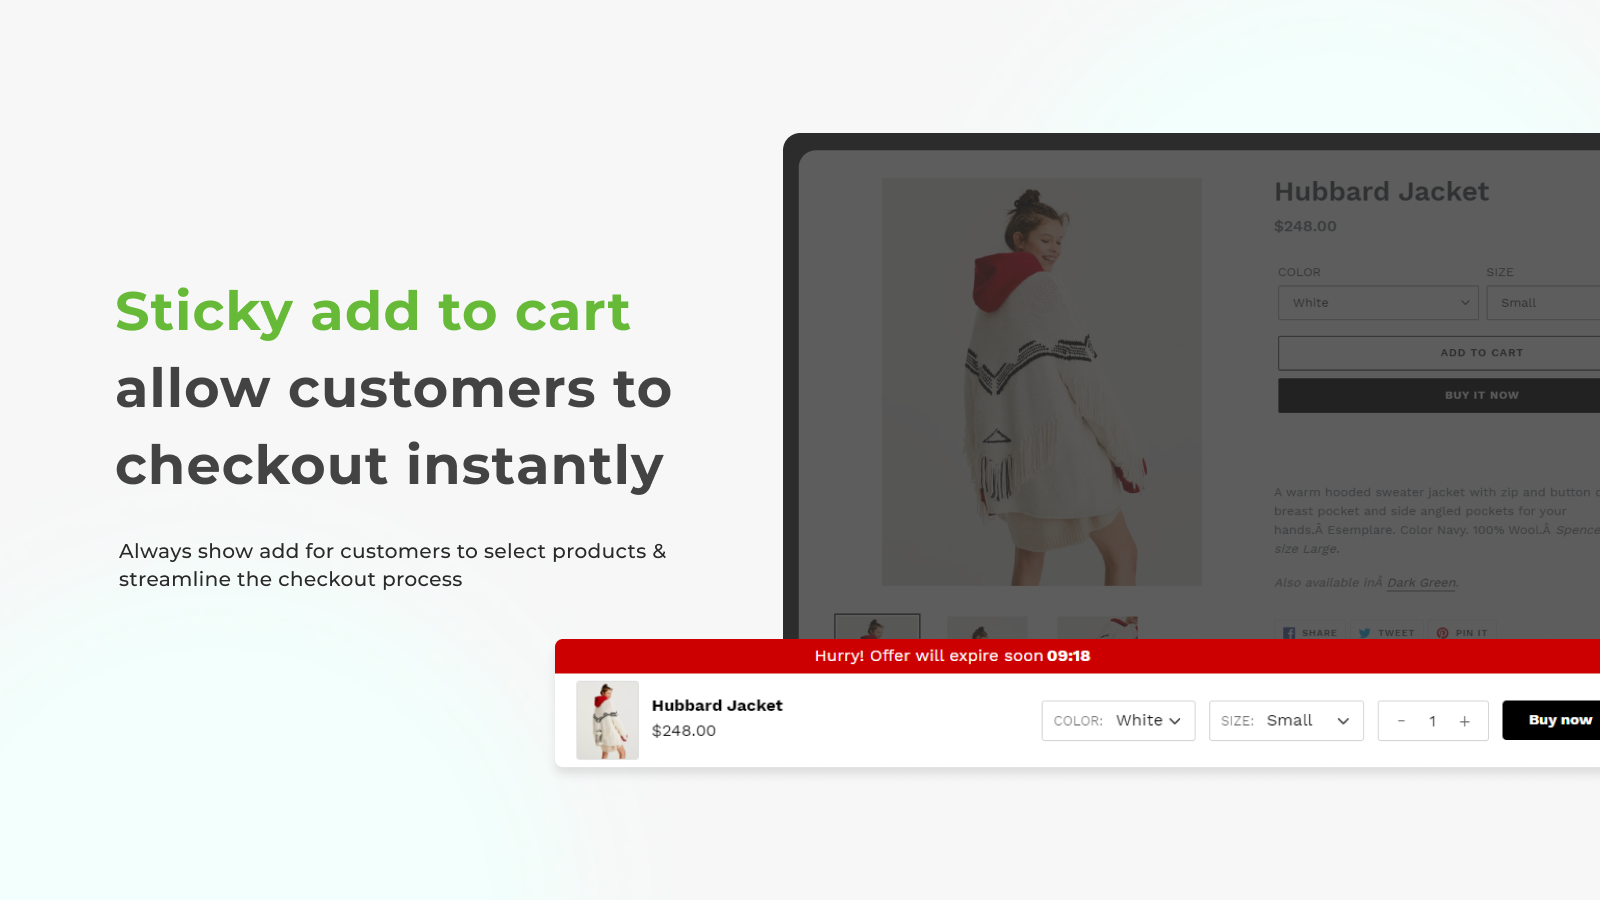 Sticky add to cart allow customers to checkout instantly